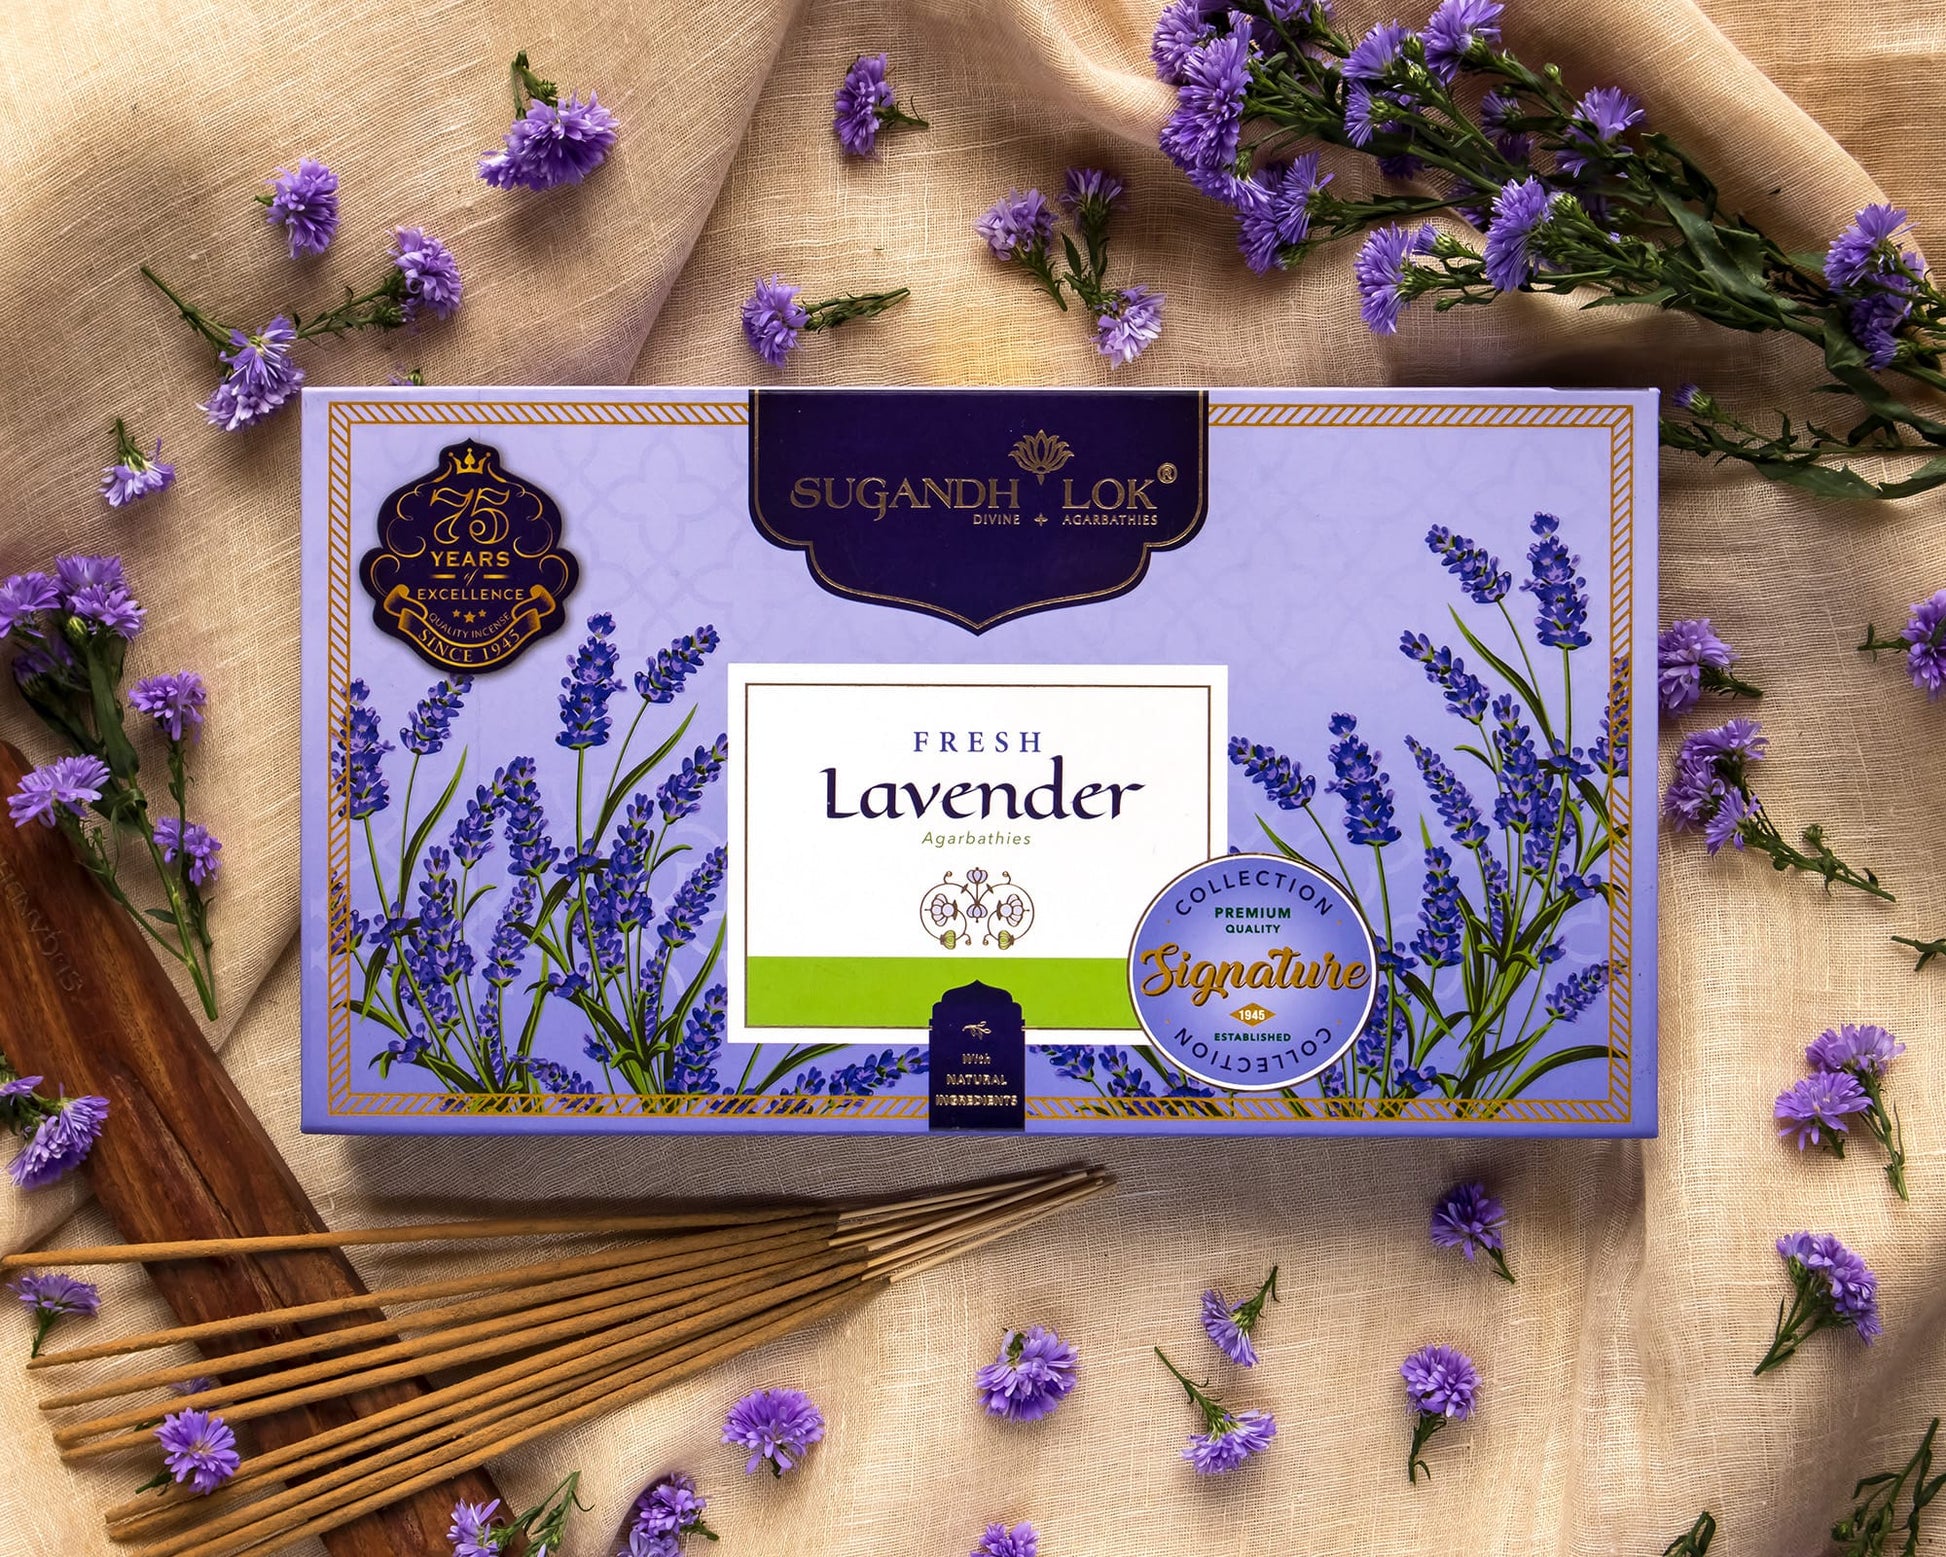 Fresh Lavender Agarbatti Box surrounded by lavender flowers